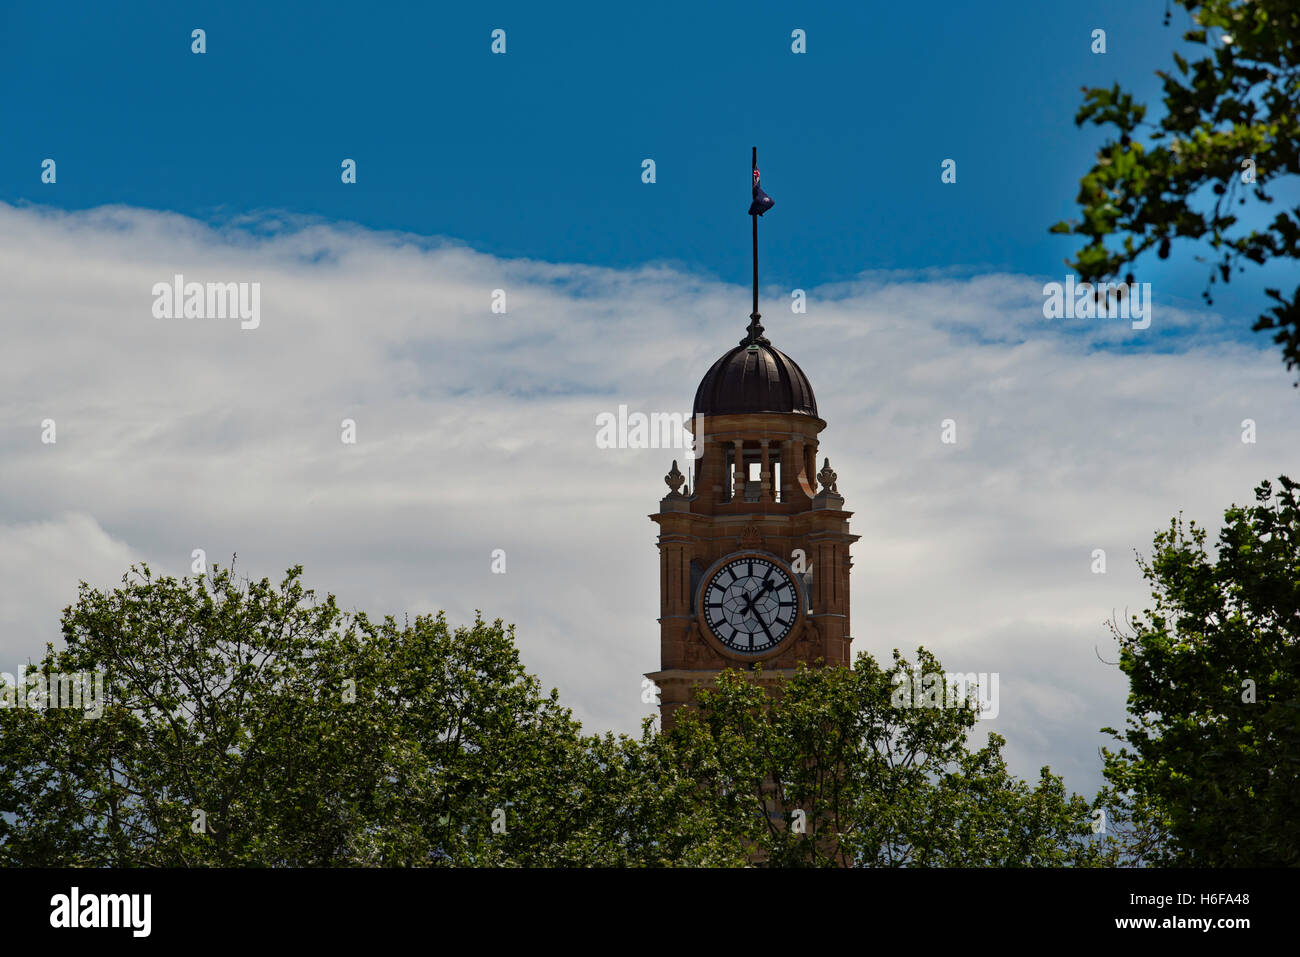 The historic analogue clock tower at Sydney's Central Railway Station in Australia Stock Photo